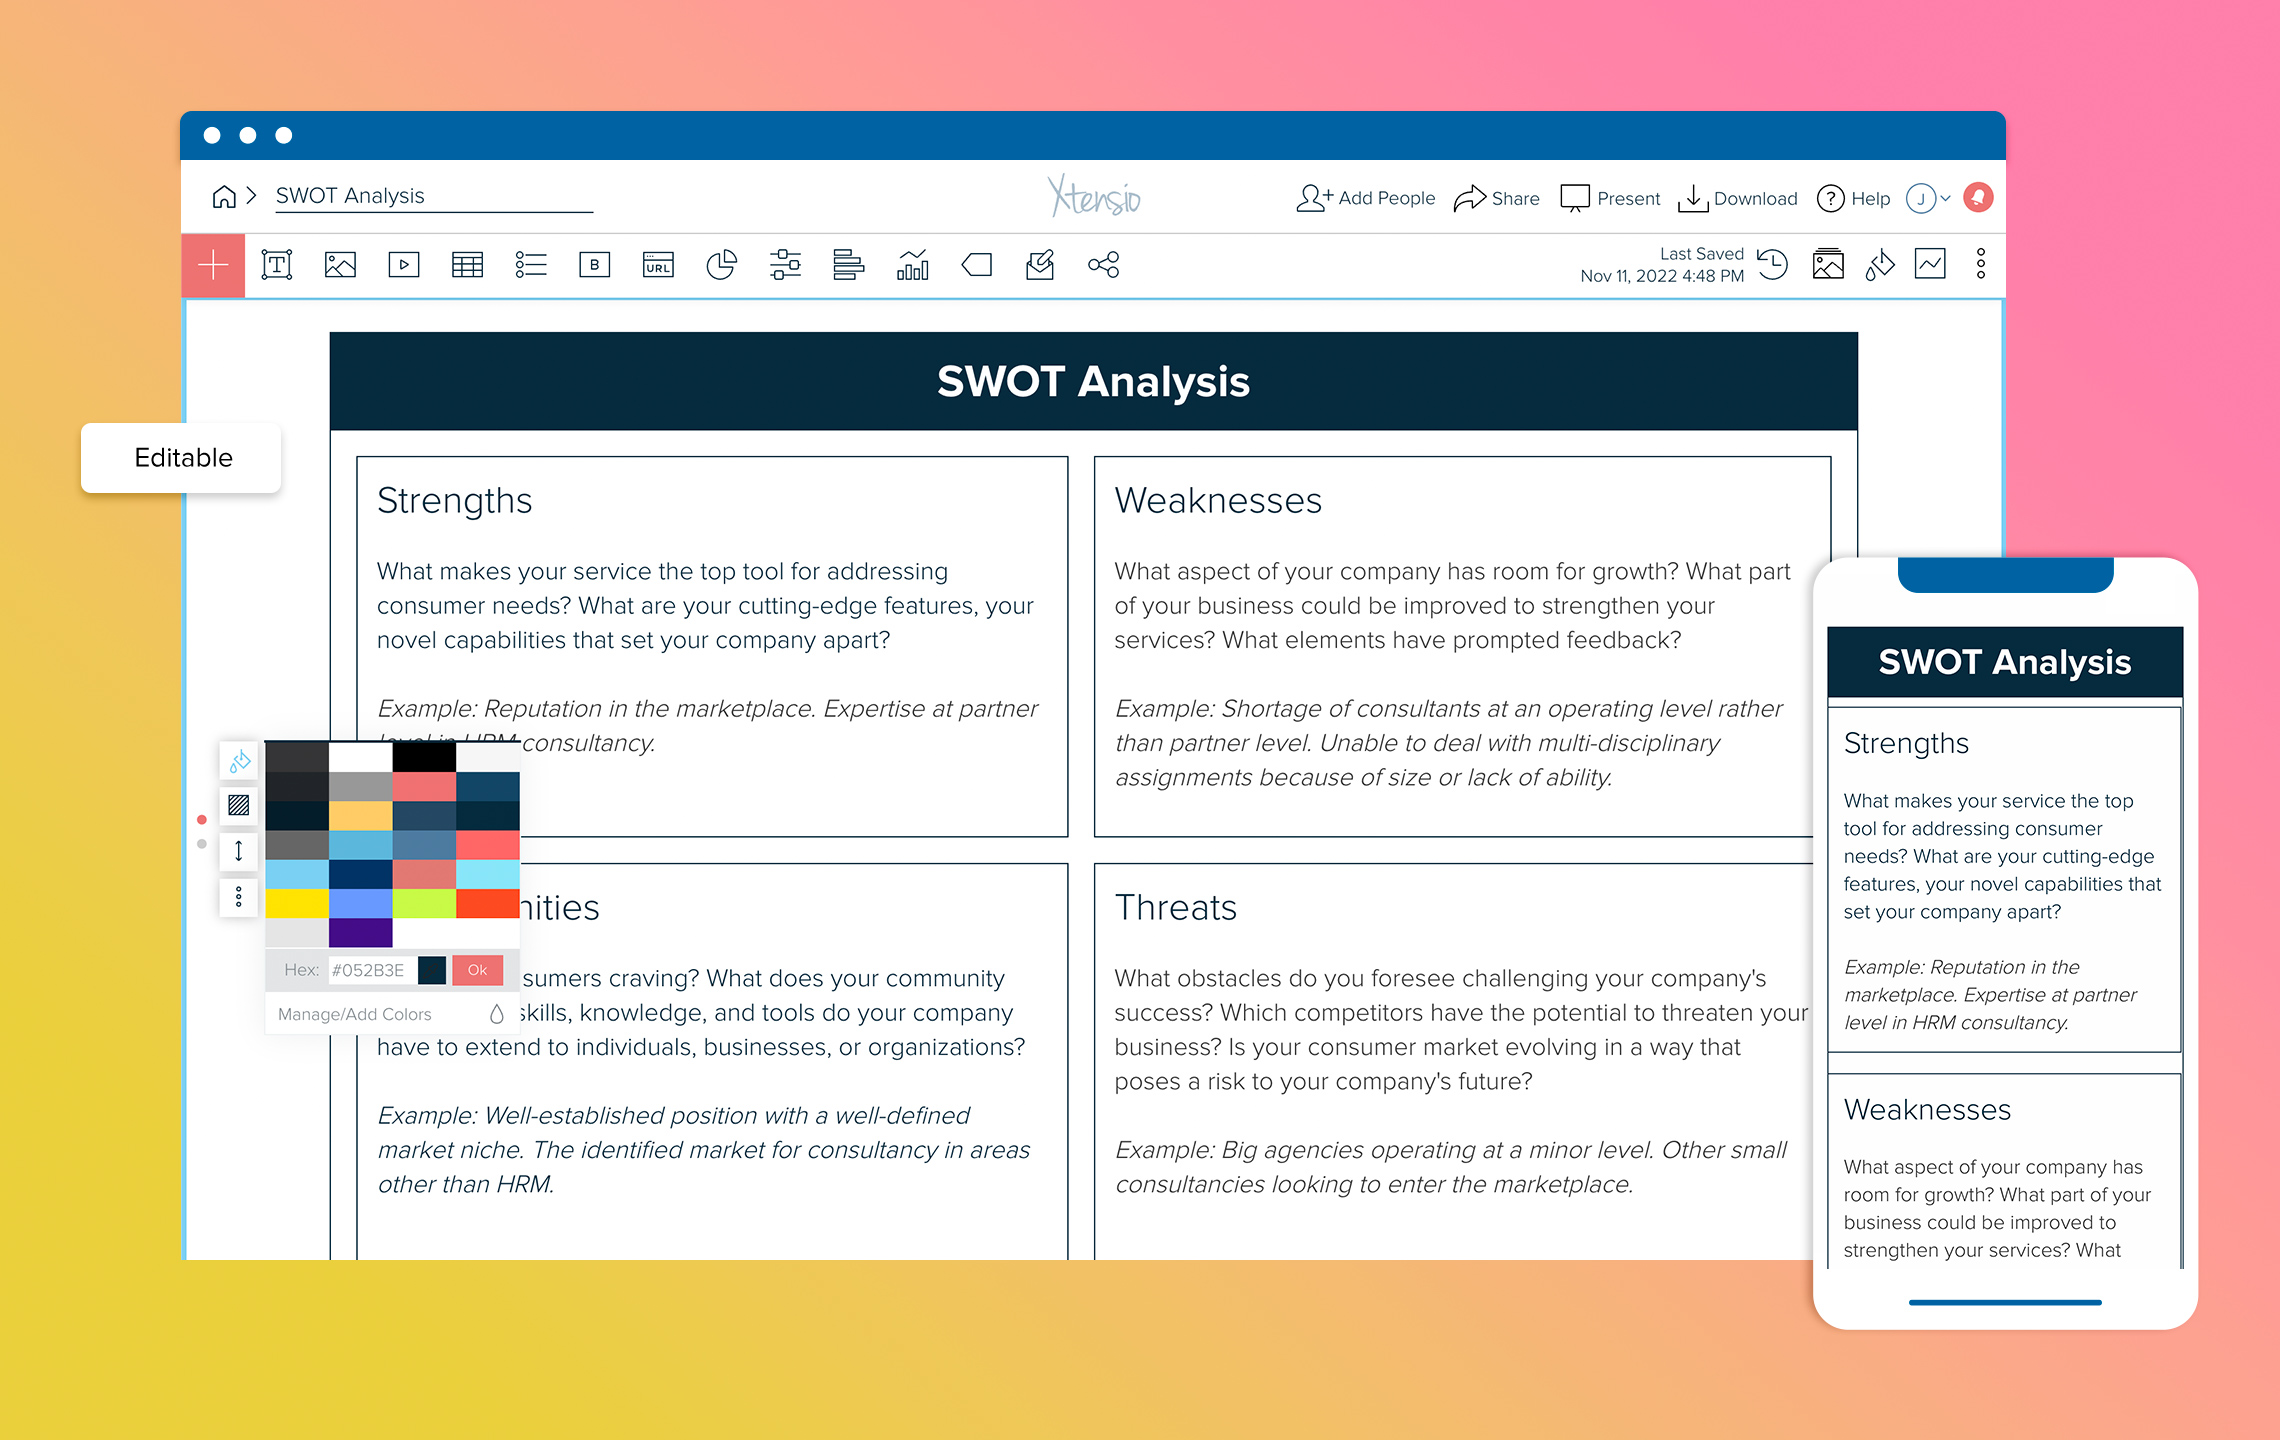 Swot Analysis Doesn’t Speak To Your Business Philosophy? Try These Swot Analysis Alternatives | Xtensio | 2023